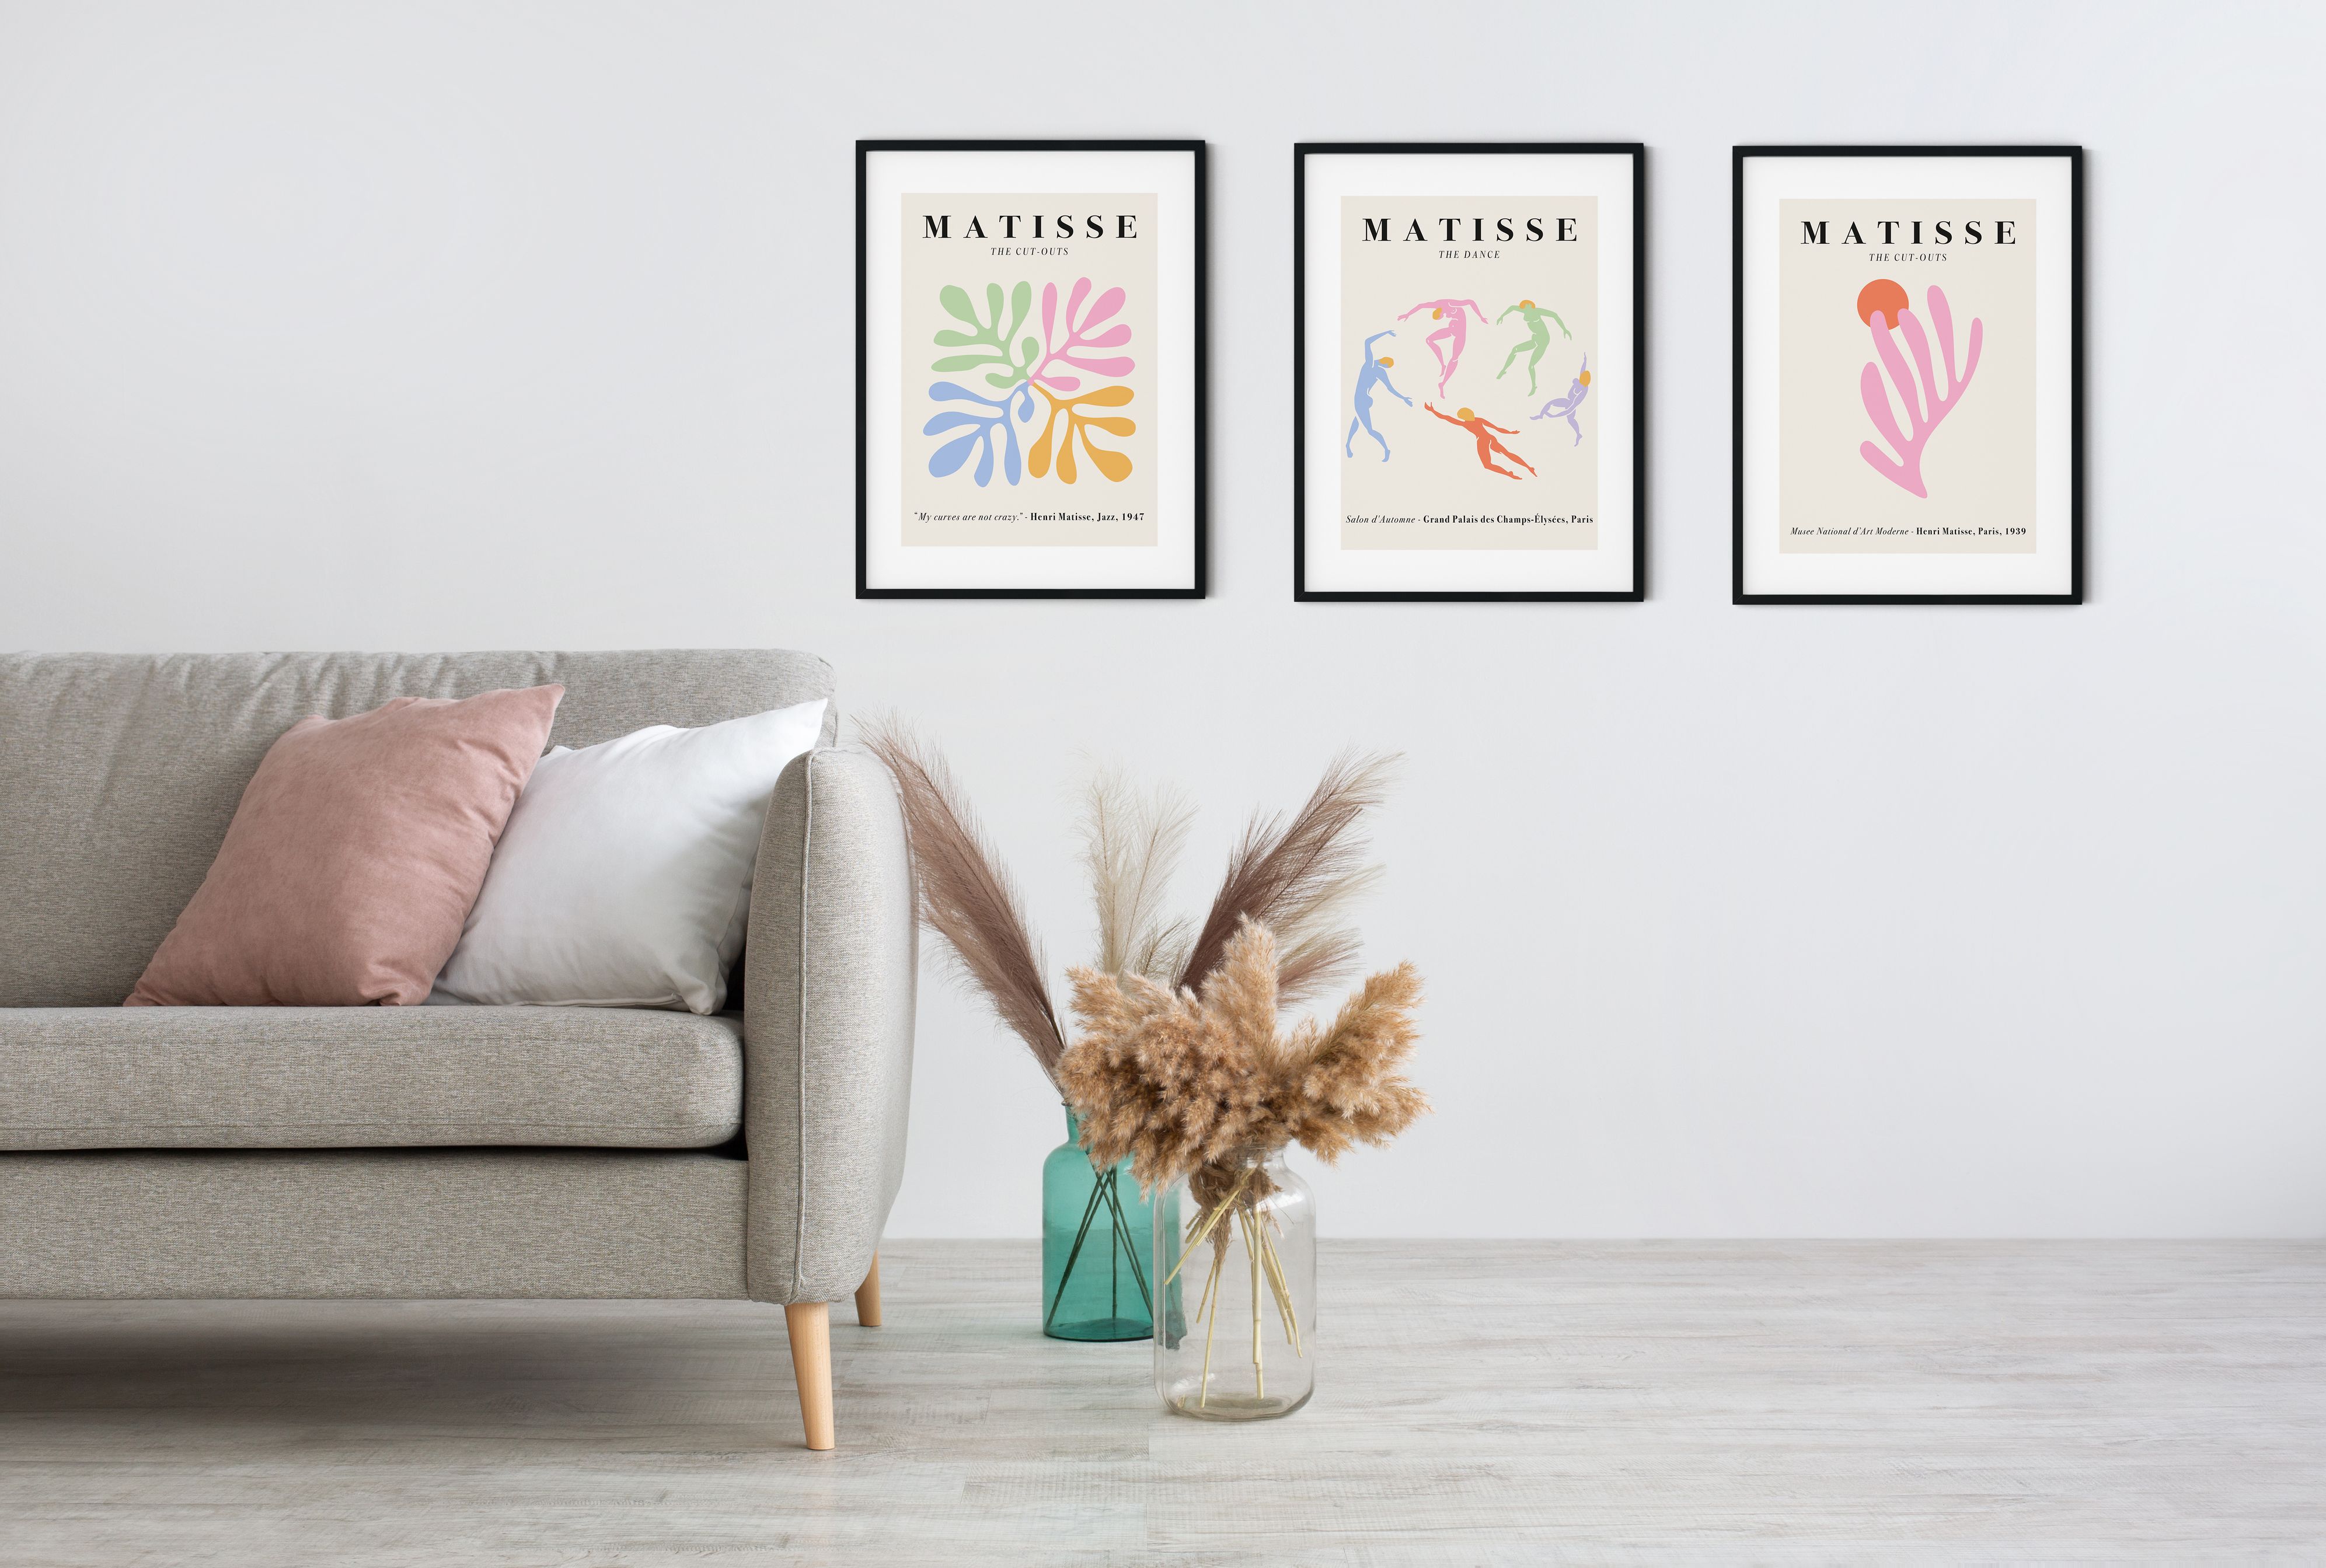 Haus and Hues Set of 3 Danish Pastel Posters, Danish Pastel Room Decor,  Danish Pastel Decor, Danish Pastel (12x16, 16x20, UNFRAMED/FRAMED) 